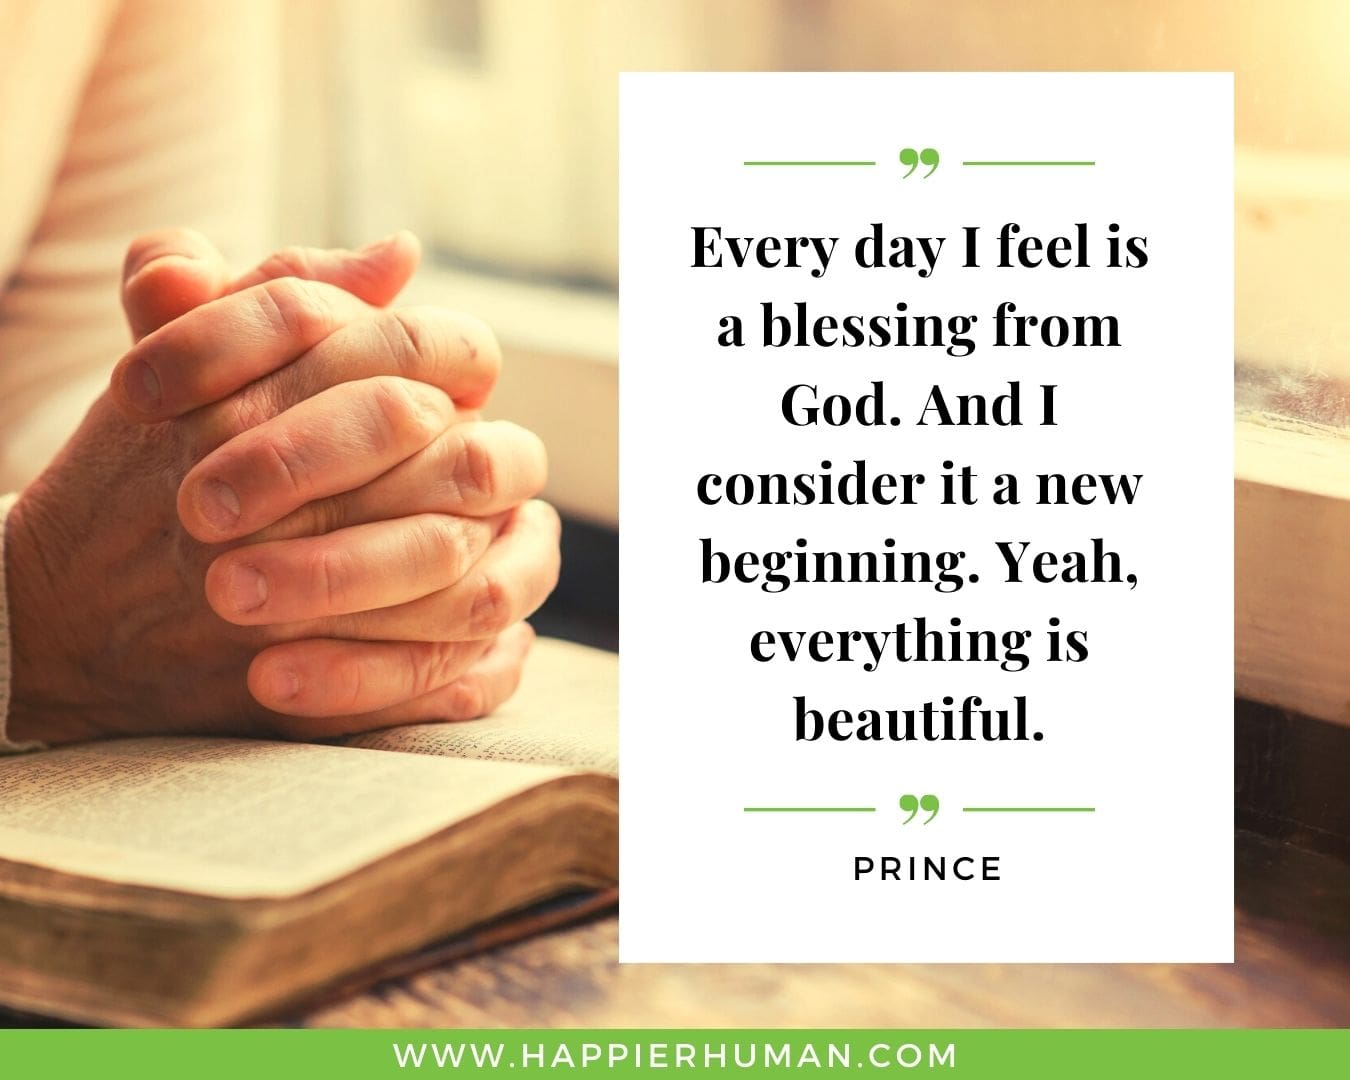 Great Day Quotes - “Every day I feel is a blessing from God. And I consider it a new beginning. Yeah, everything is beautiful.” – Prince